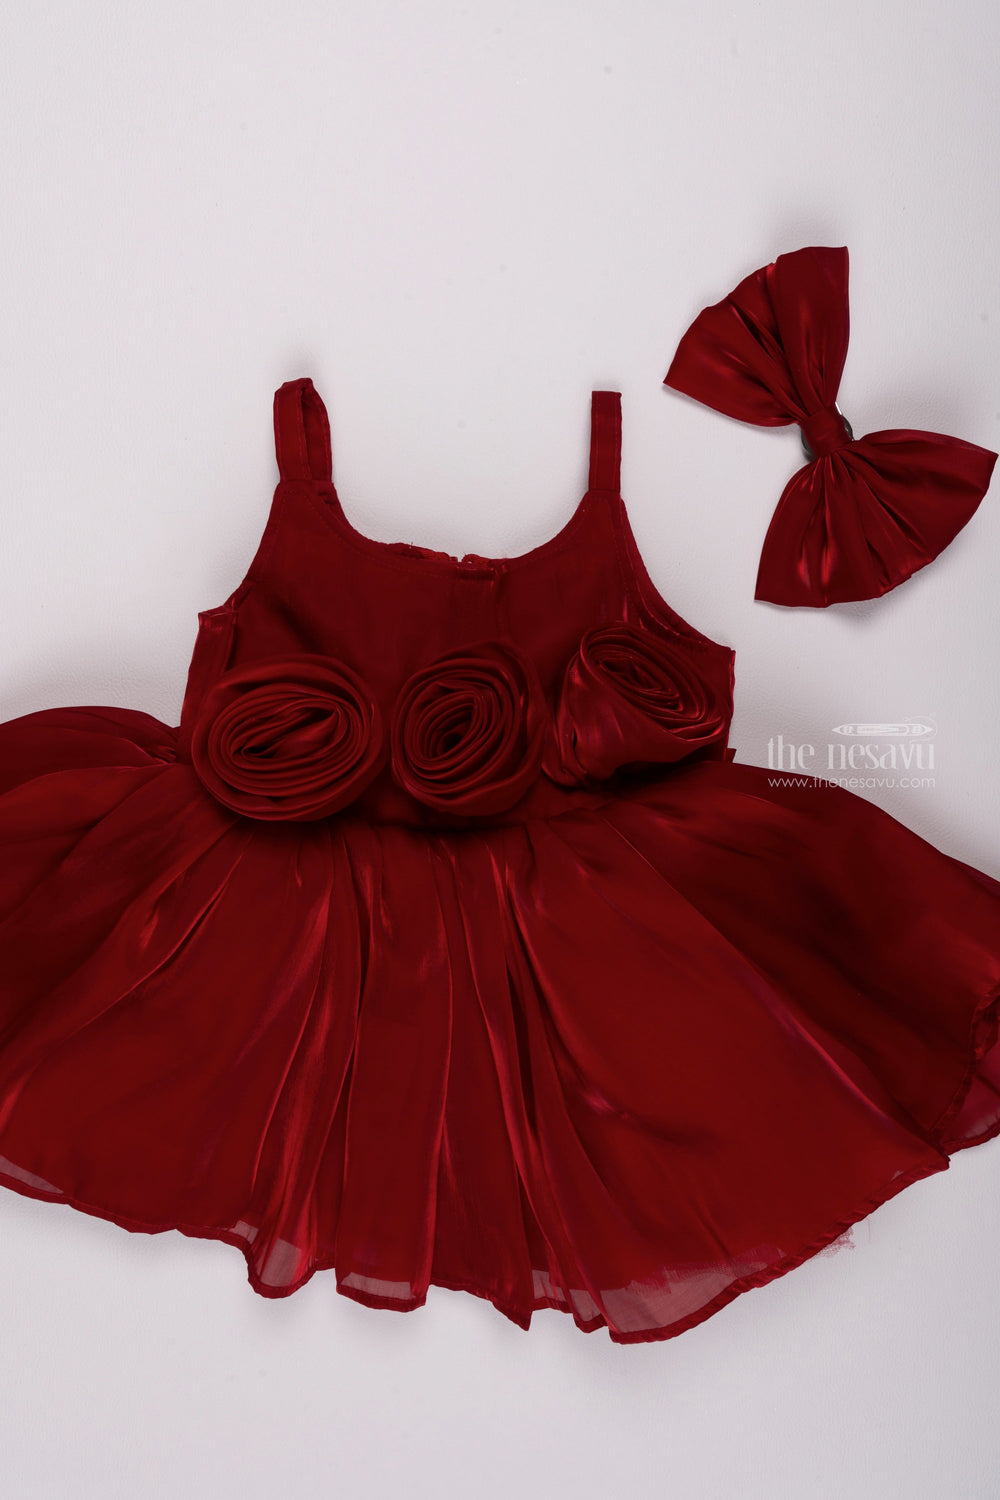 The Nesavu Girls Fancy Party Frock Crimson Blossom: Gorgeous Fabric Floral Applique on Red Organza Party Dress Nesavu Premium Organza Baby Dresses | Fancy Dresses for Little Girls | The Nesavu